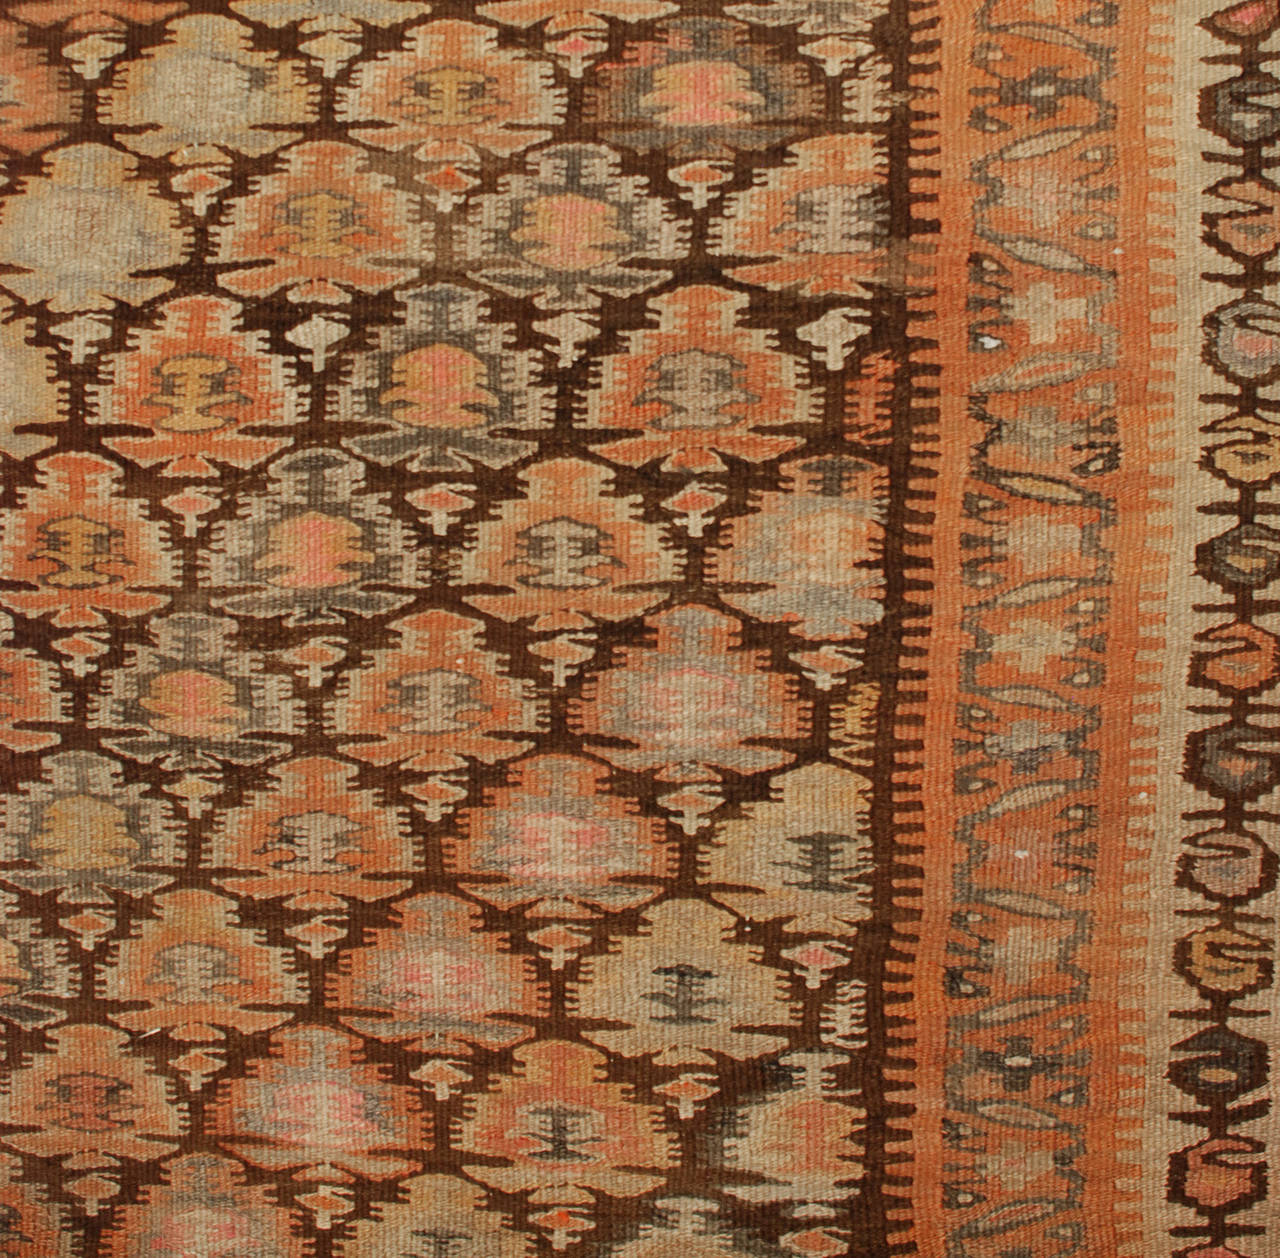 An early 20th century Persian Qazvin Kilim runner with alternating multicolored tree-of-life pattern surrounded by multiple complementary floral and geometric borders.